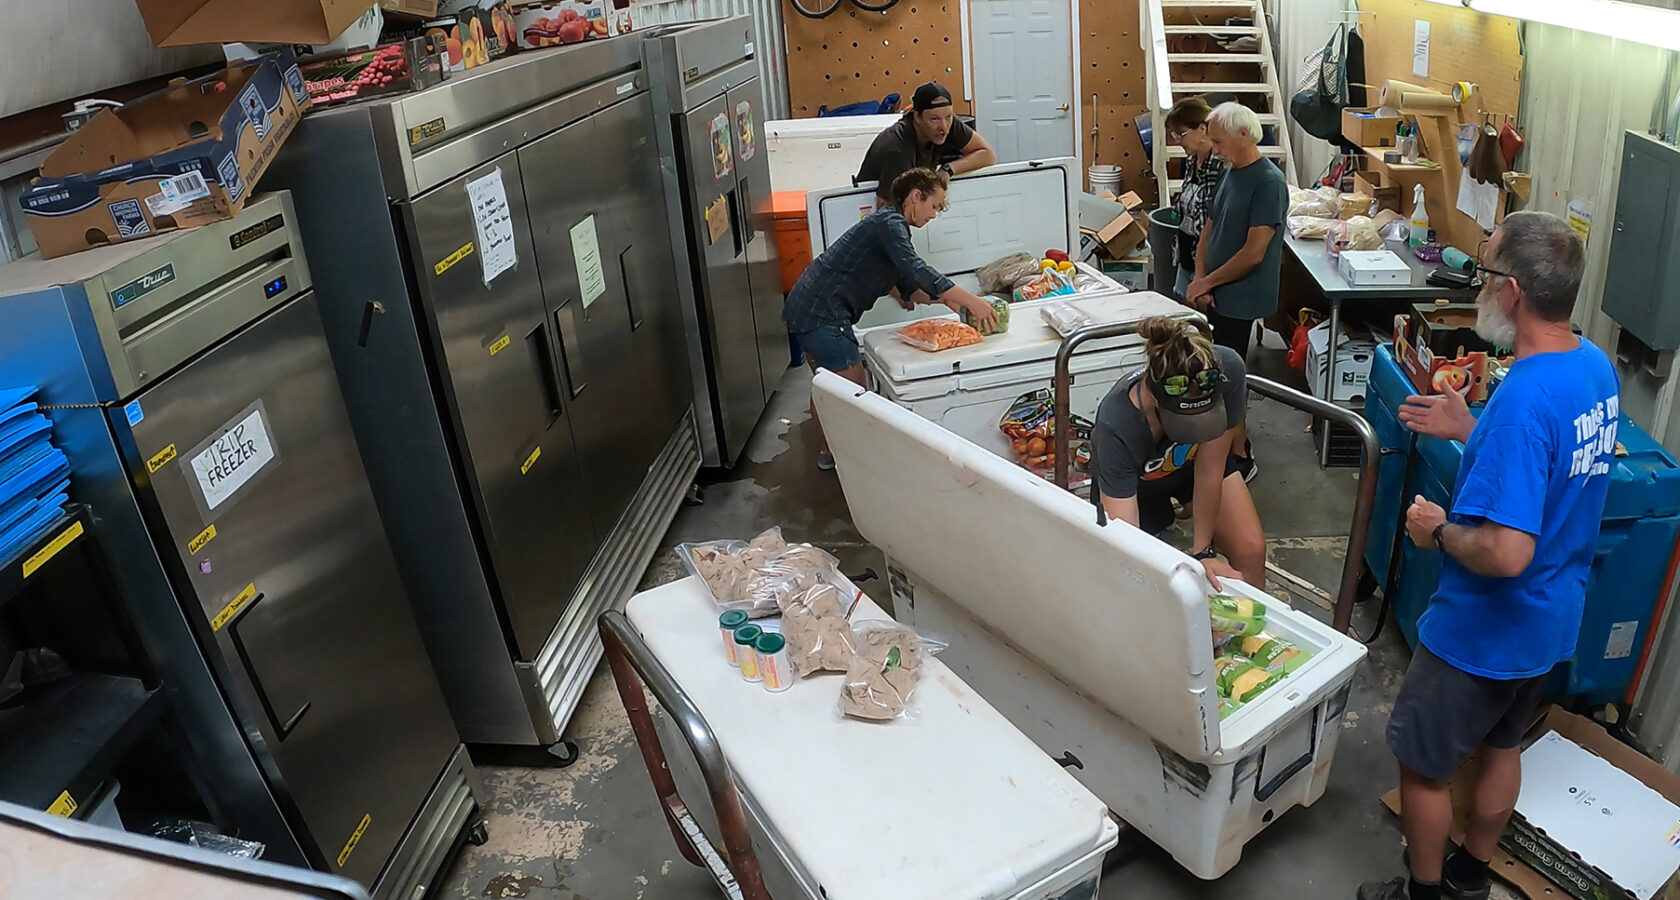 A group of people work together to pack large YETI coolers for a Grand Canyon rafting trip